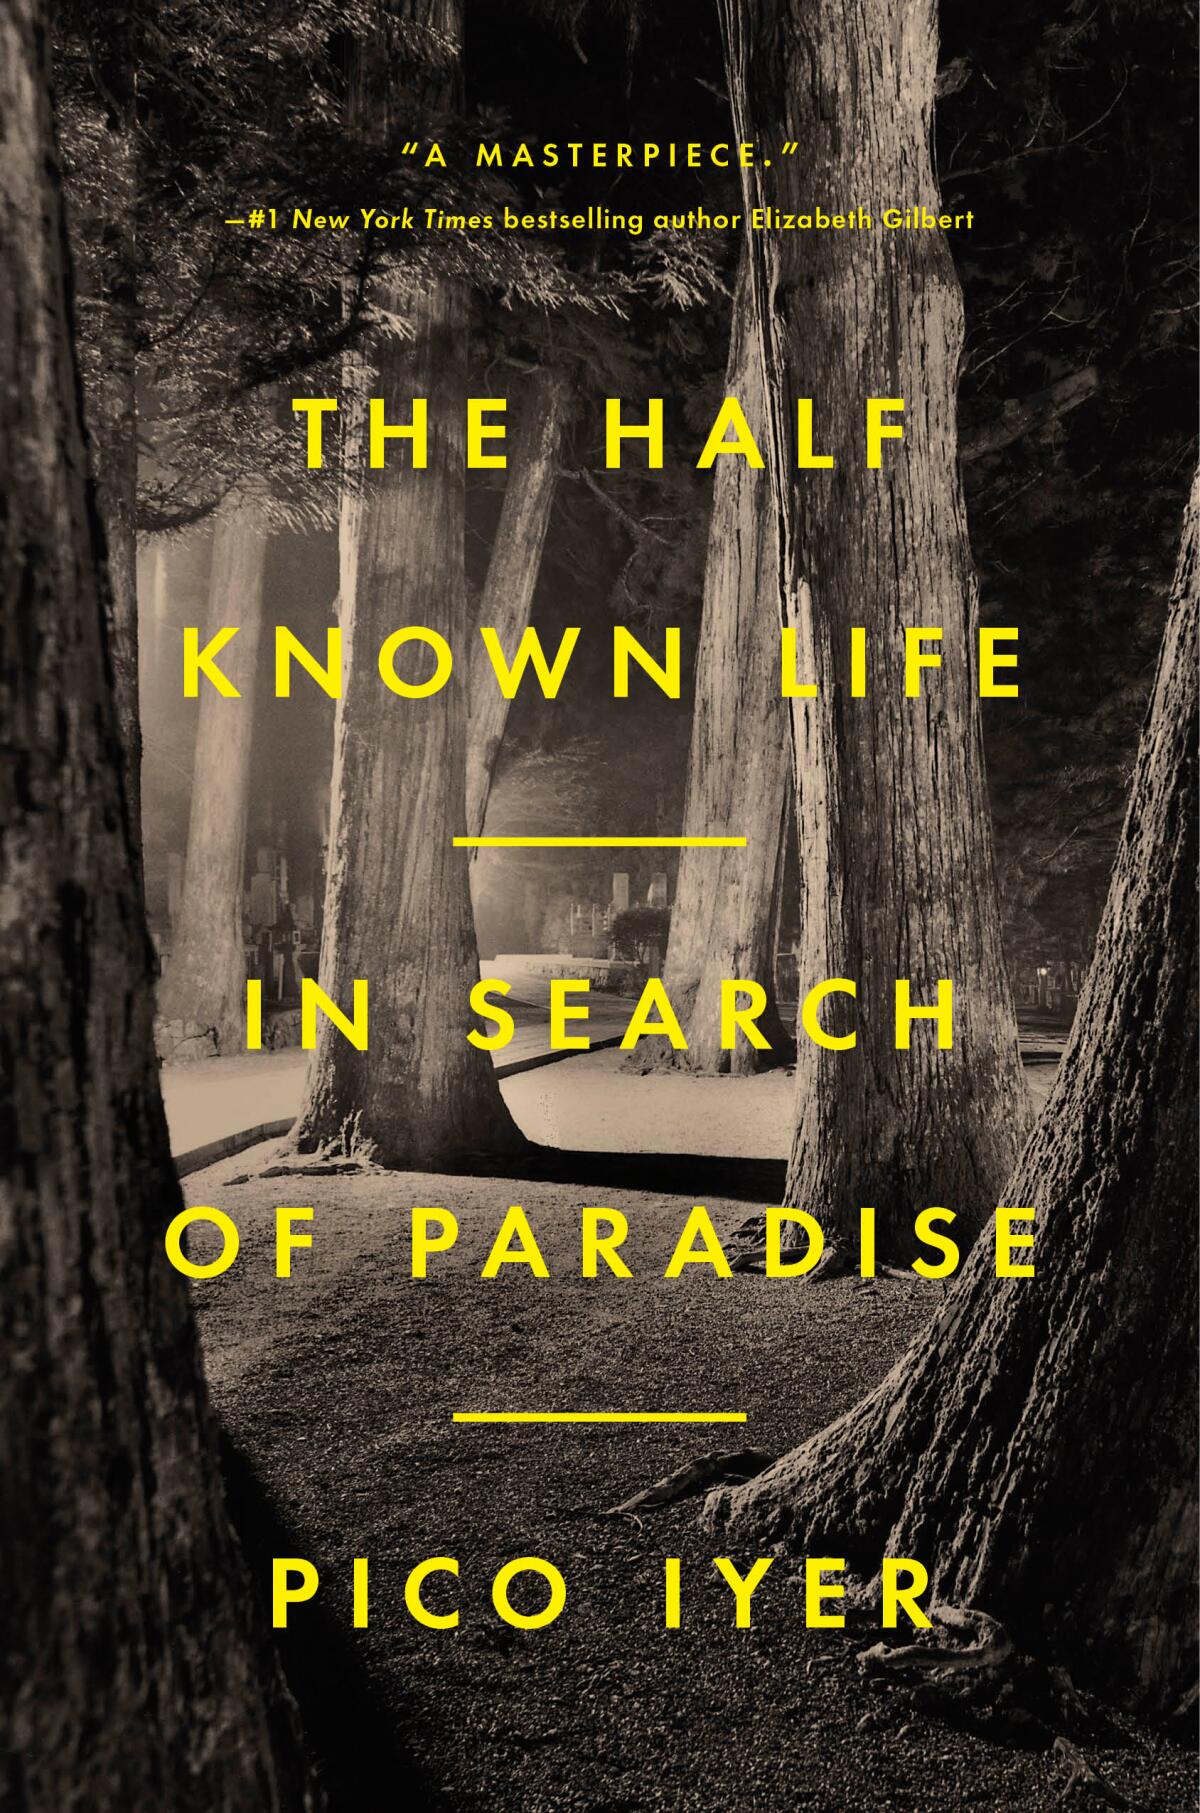 'The Half Known Life: In Search of Paradise' by Pico Iyer